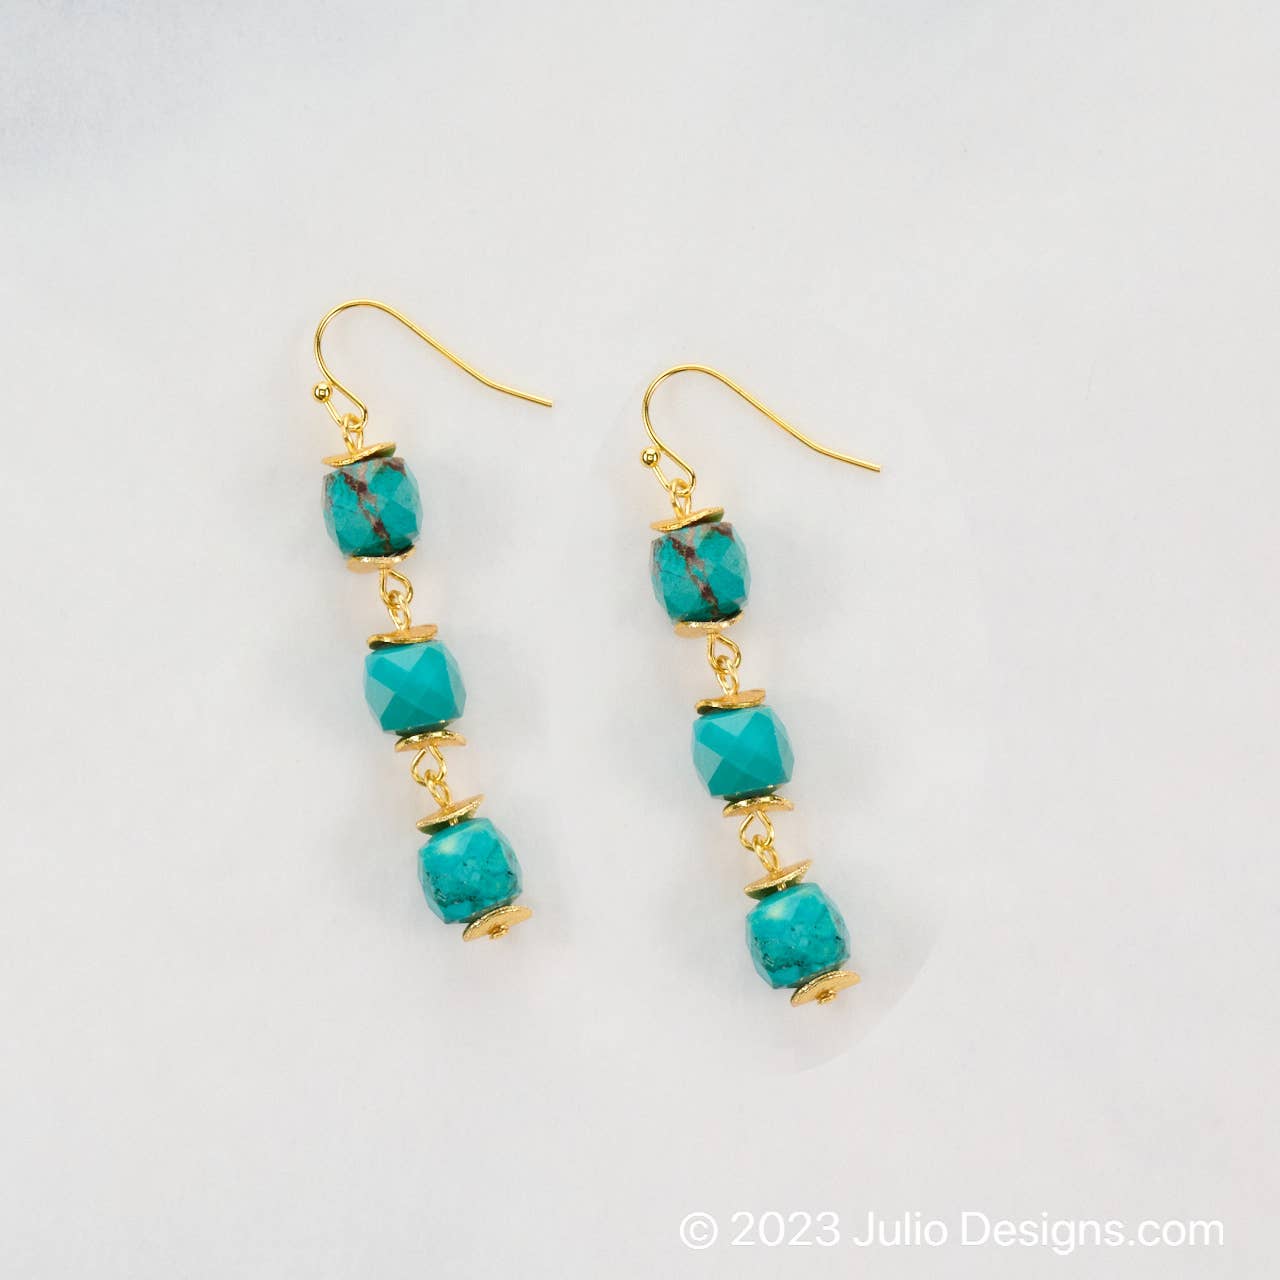 Arlene Earring featuring Faceted Gemstone Cubes - Turquoise